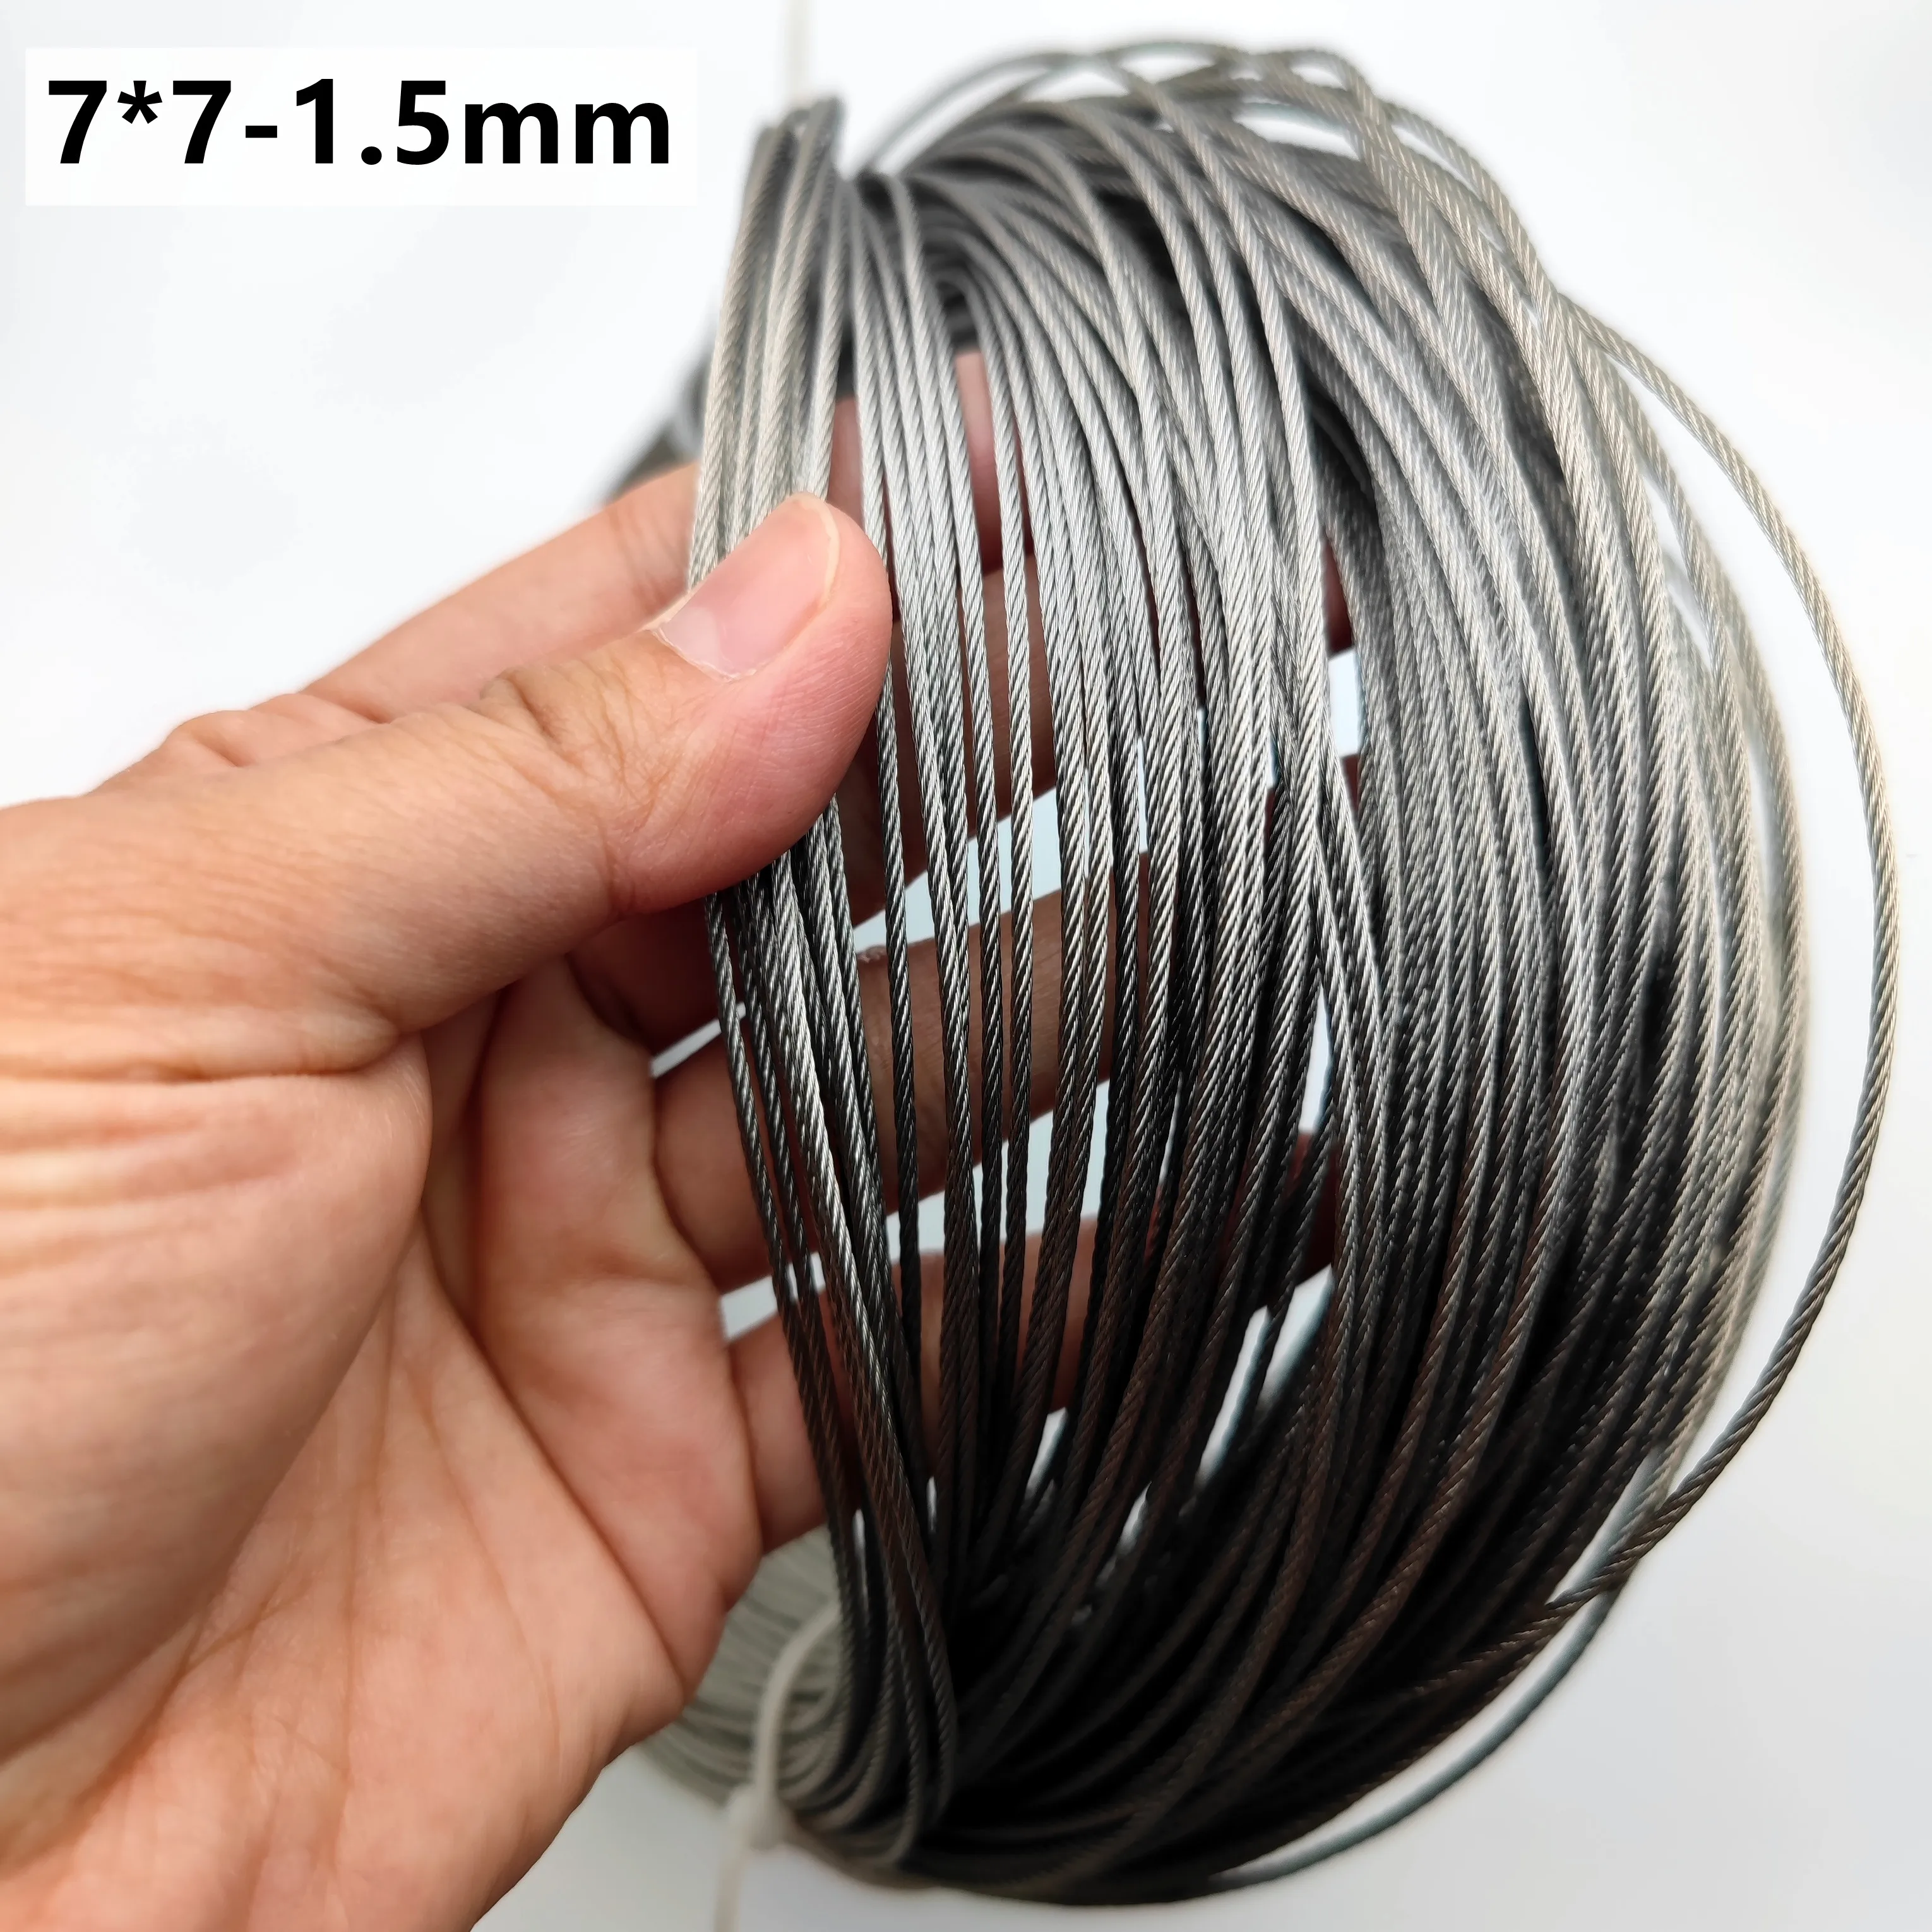 50M/100M/200M 1.5mm Diameter 7X7 Construction 304 Stainless steel Wire rope Alambre Softer Fishing Lifting Cable 50m 100m 2mm diameter 7x7 construction 304 stainless steel wire rope alambre softer fishing lifting cable